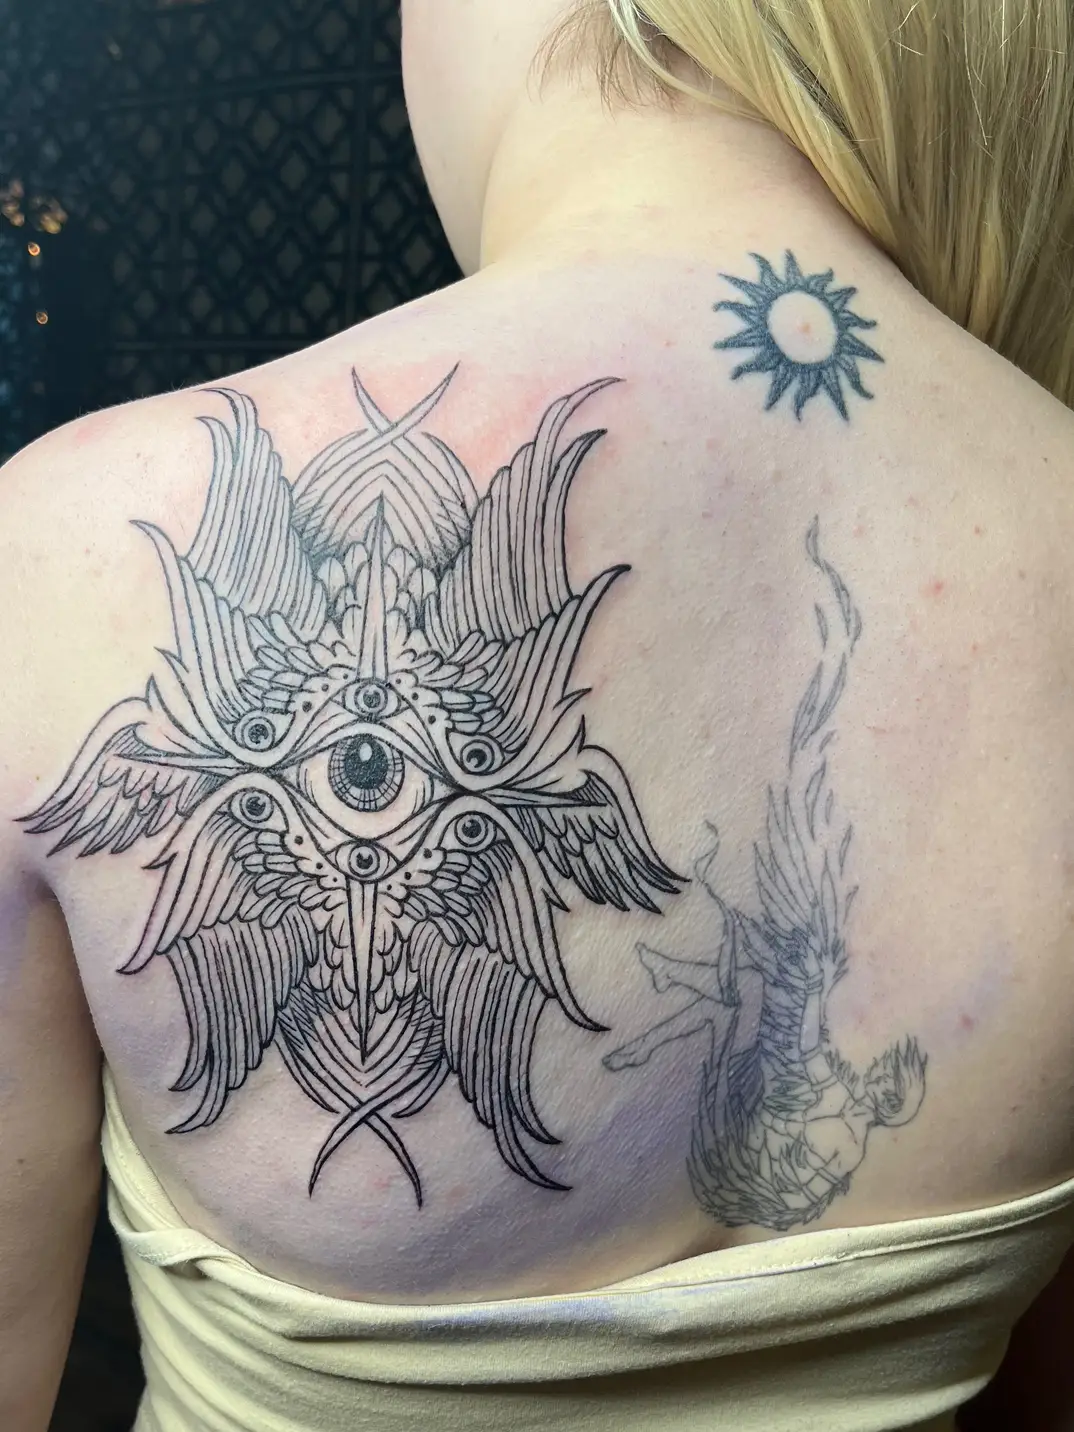 Biblically accurate angel tattoo | Gallery posted by Danny | Lemon8